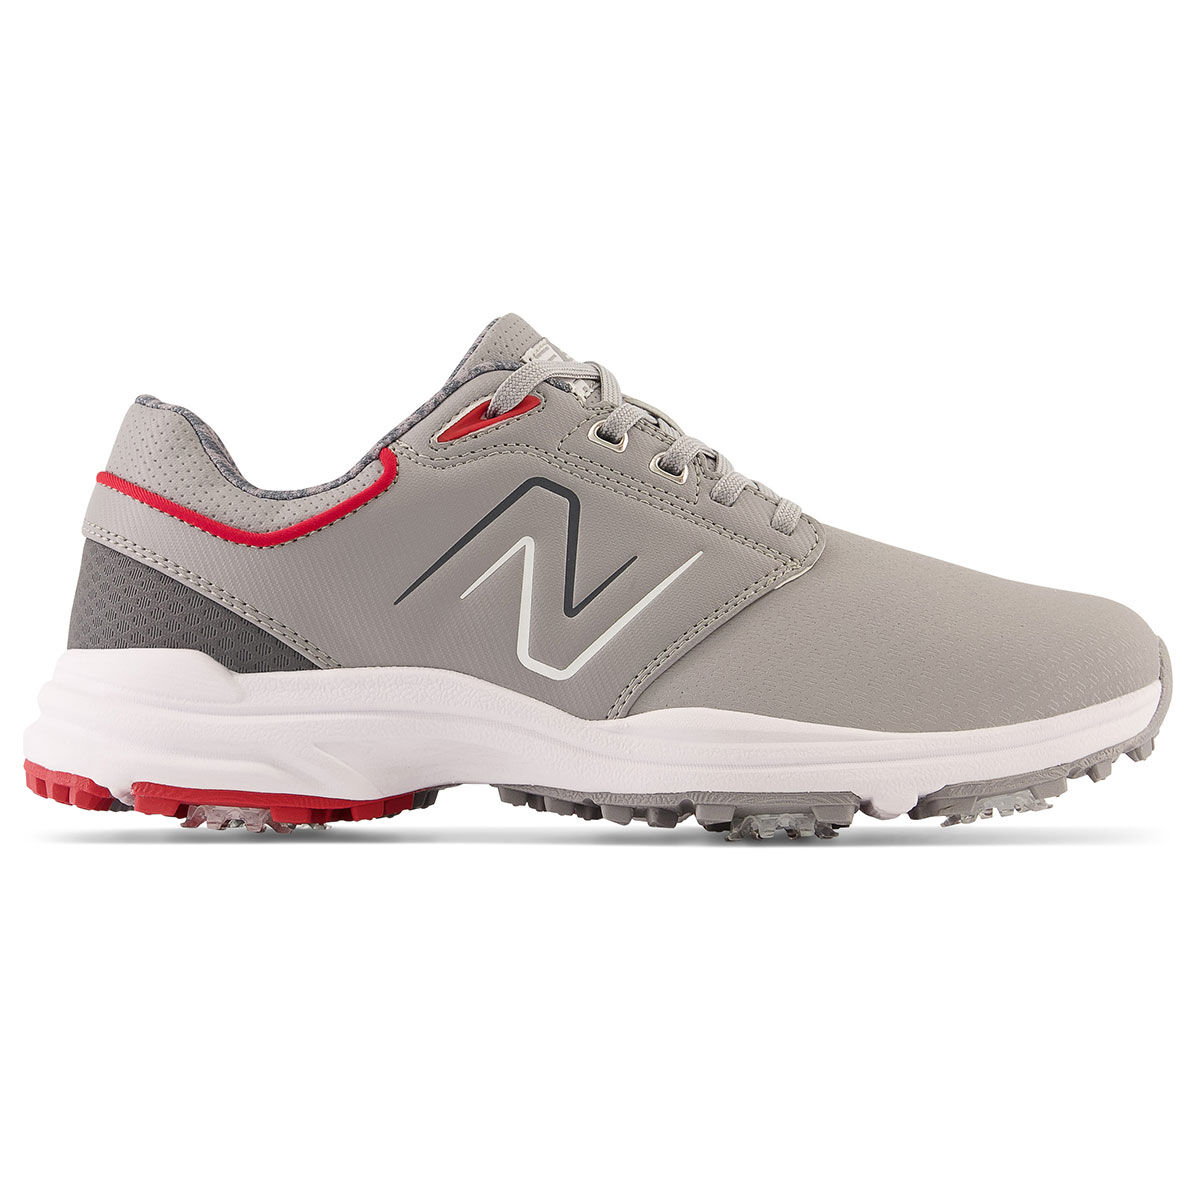 New Balance Men’s Grey Waterproof Brighton Spiked Golf Shoes, Size: 9.5 | American Golf